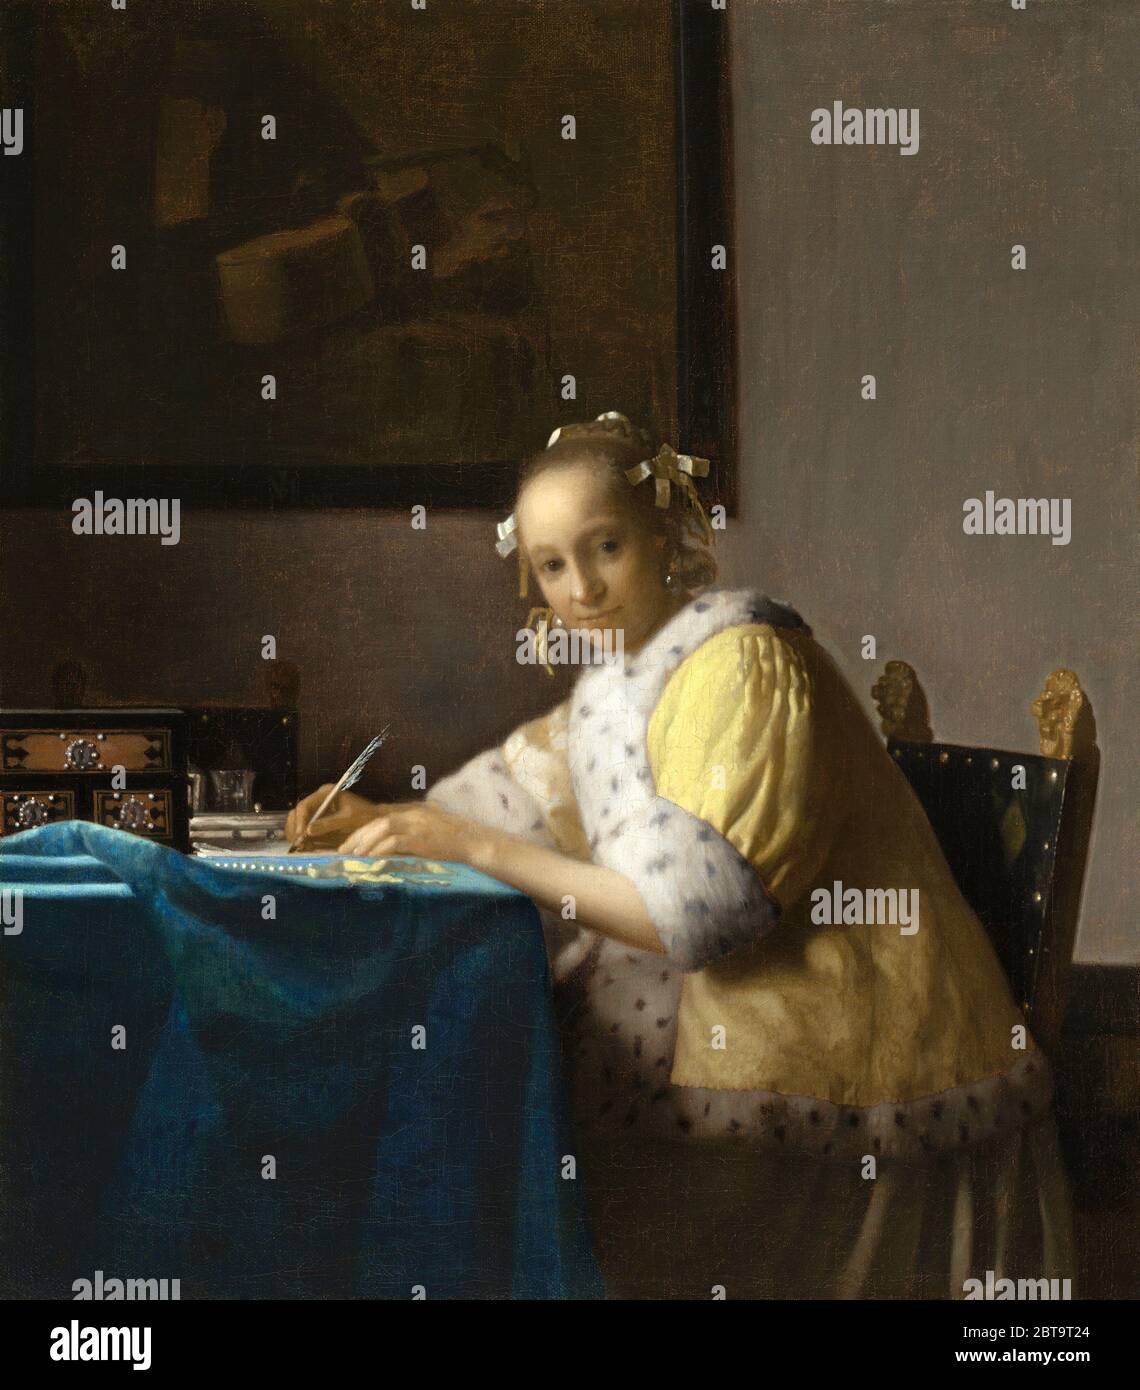 Johannes Vermeer (Dutch, 1632 - 1675), A Lady Writing, c. 1665, oil on canvas, Gift of Harry Waldron Havemeyer and Horace Havemeyer, Jr., in memory of Stock Photo